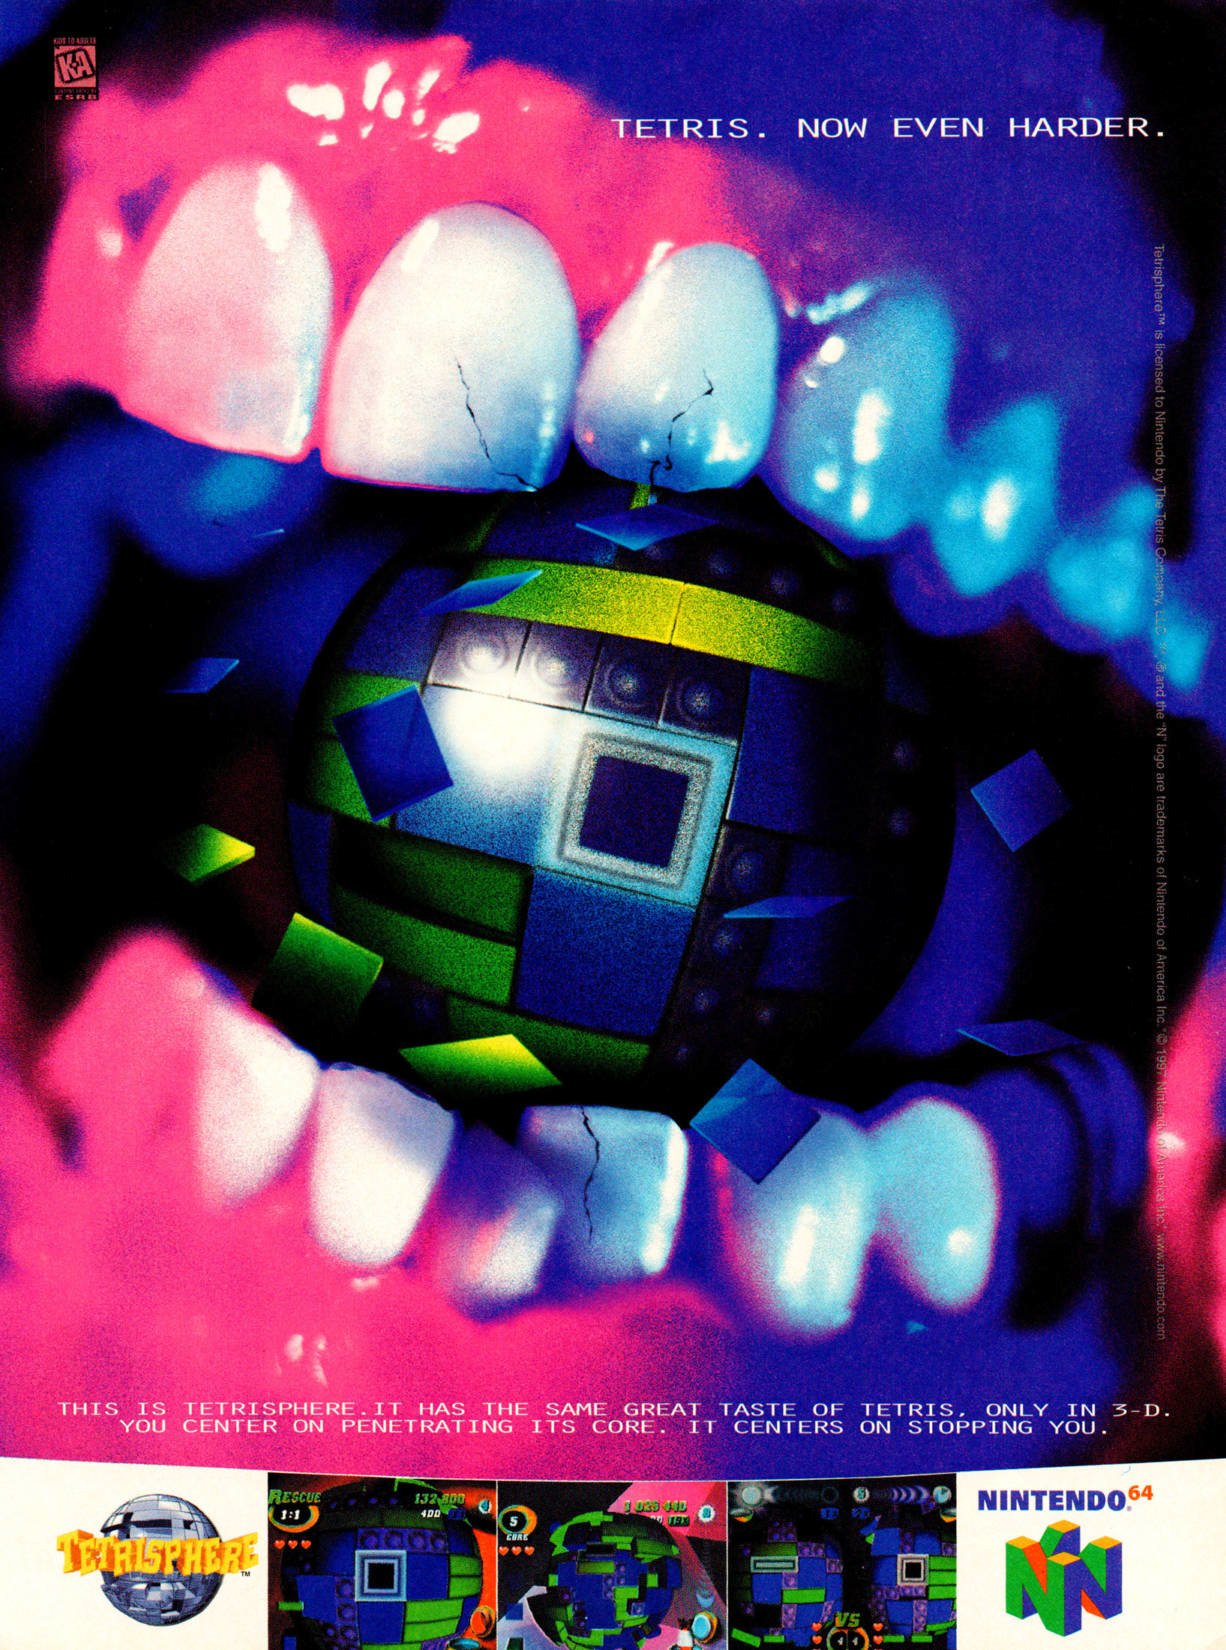 90s video game ads -  nintendo 64 - Ka Esrb Tetrisphere This Is Tetrisphere. It Has The Same Great Taste Of Tetris, Only In 3D. You Center On Penetrating Its Core. It Centers On Stopping You. Nintendo.64 Rescue 132, 800 4DD C Tetris. Now Even Harder. Core